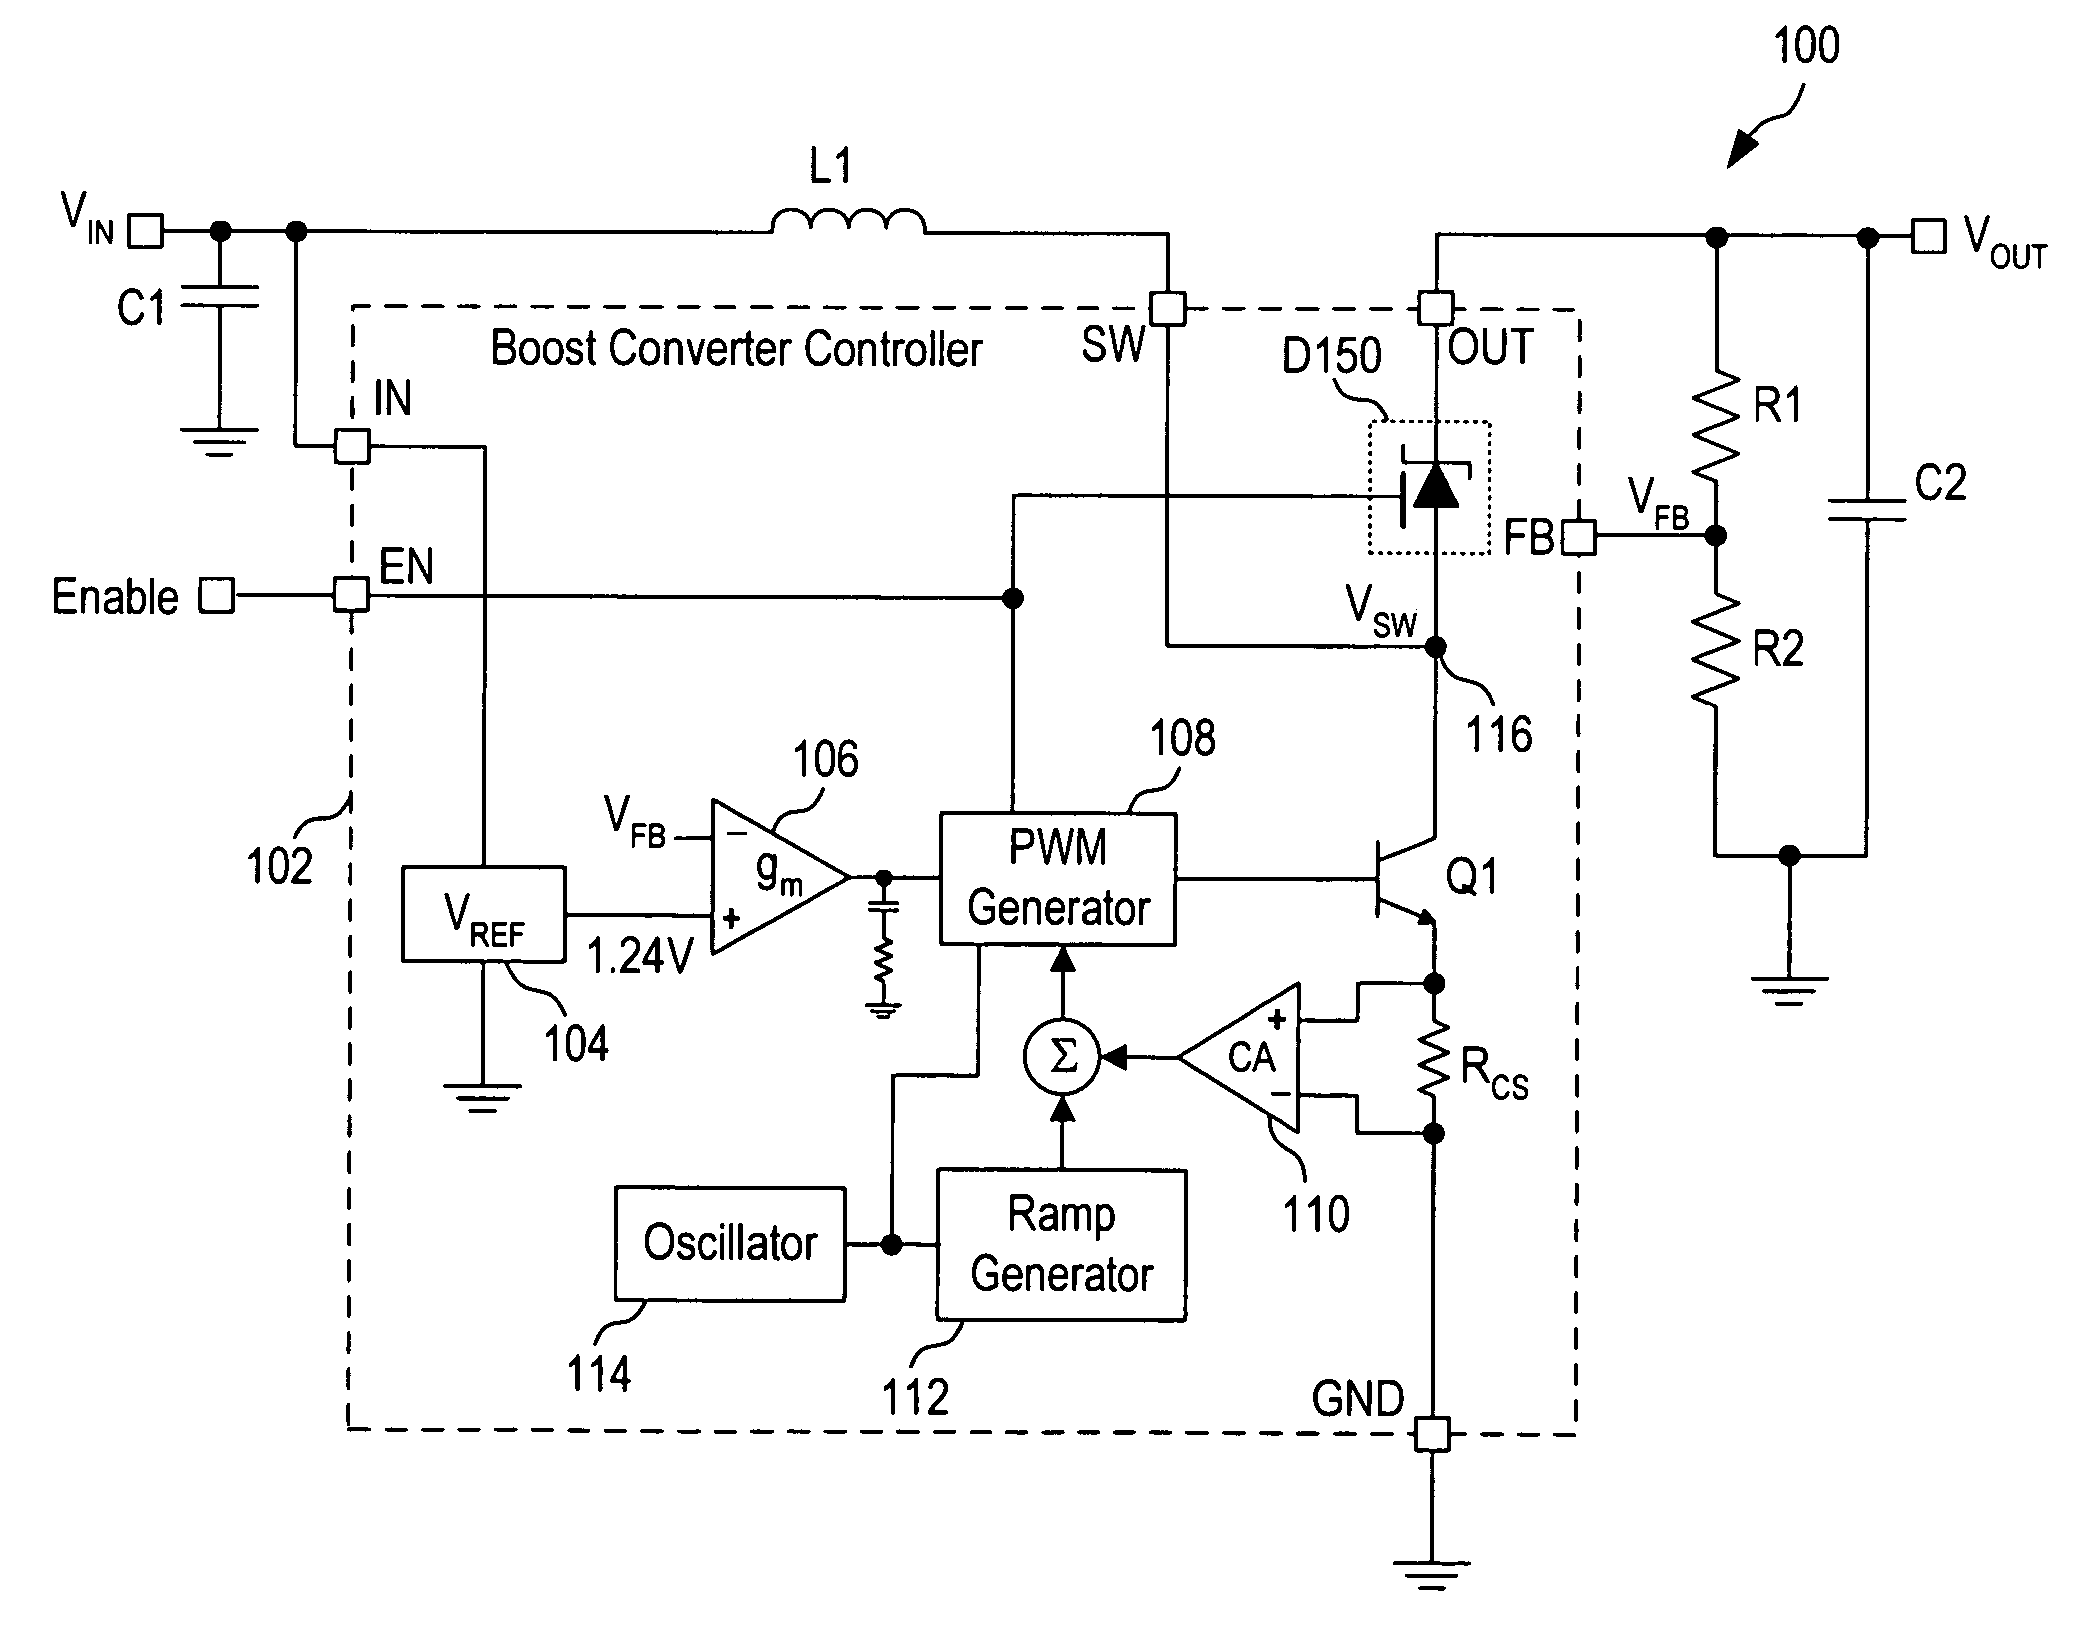 Non-synchronous boost converter including switched schottky diode for true disconnect